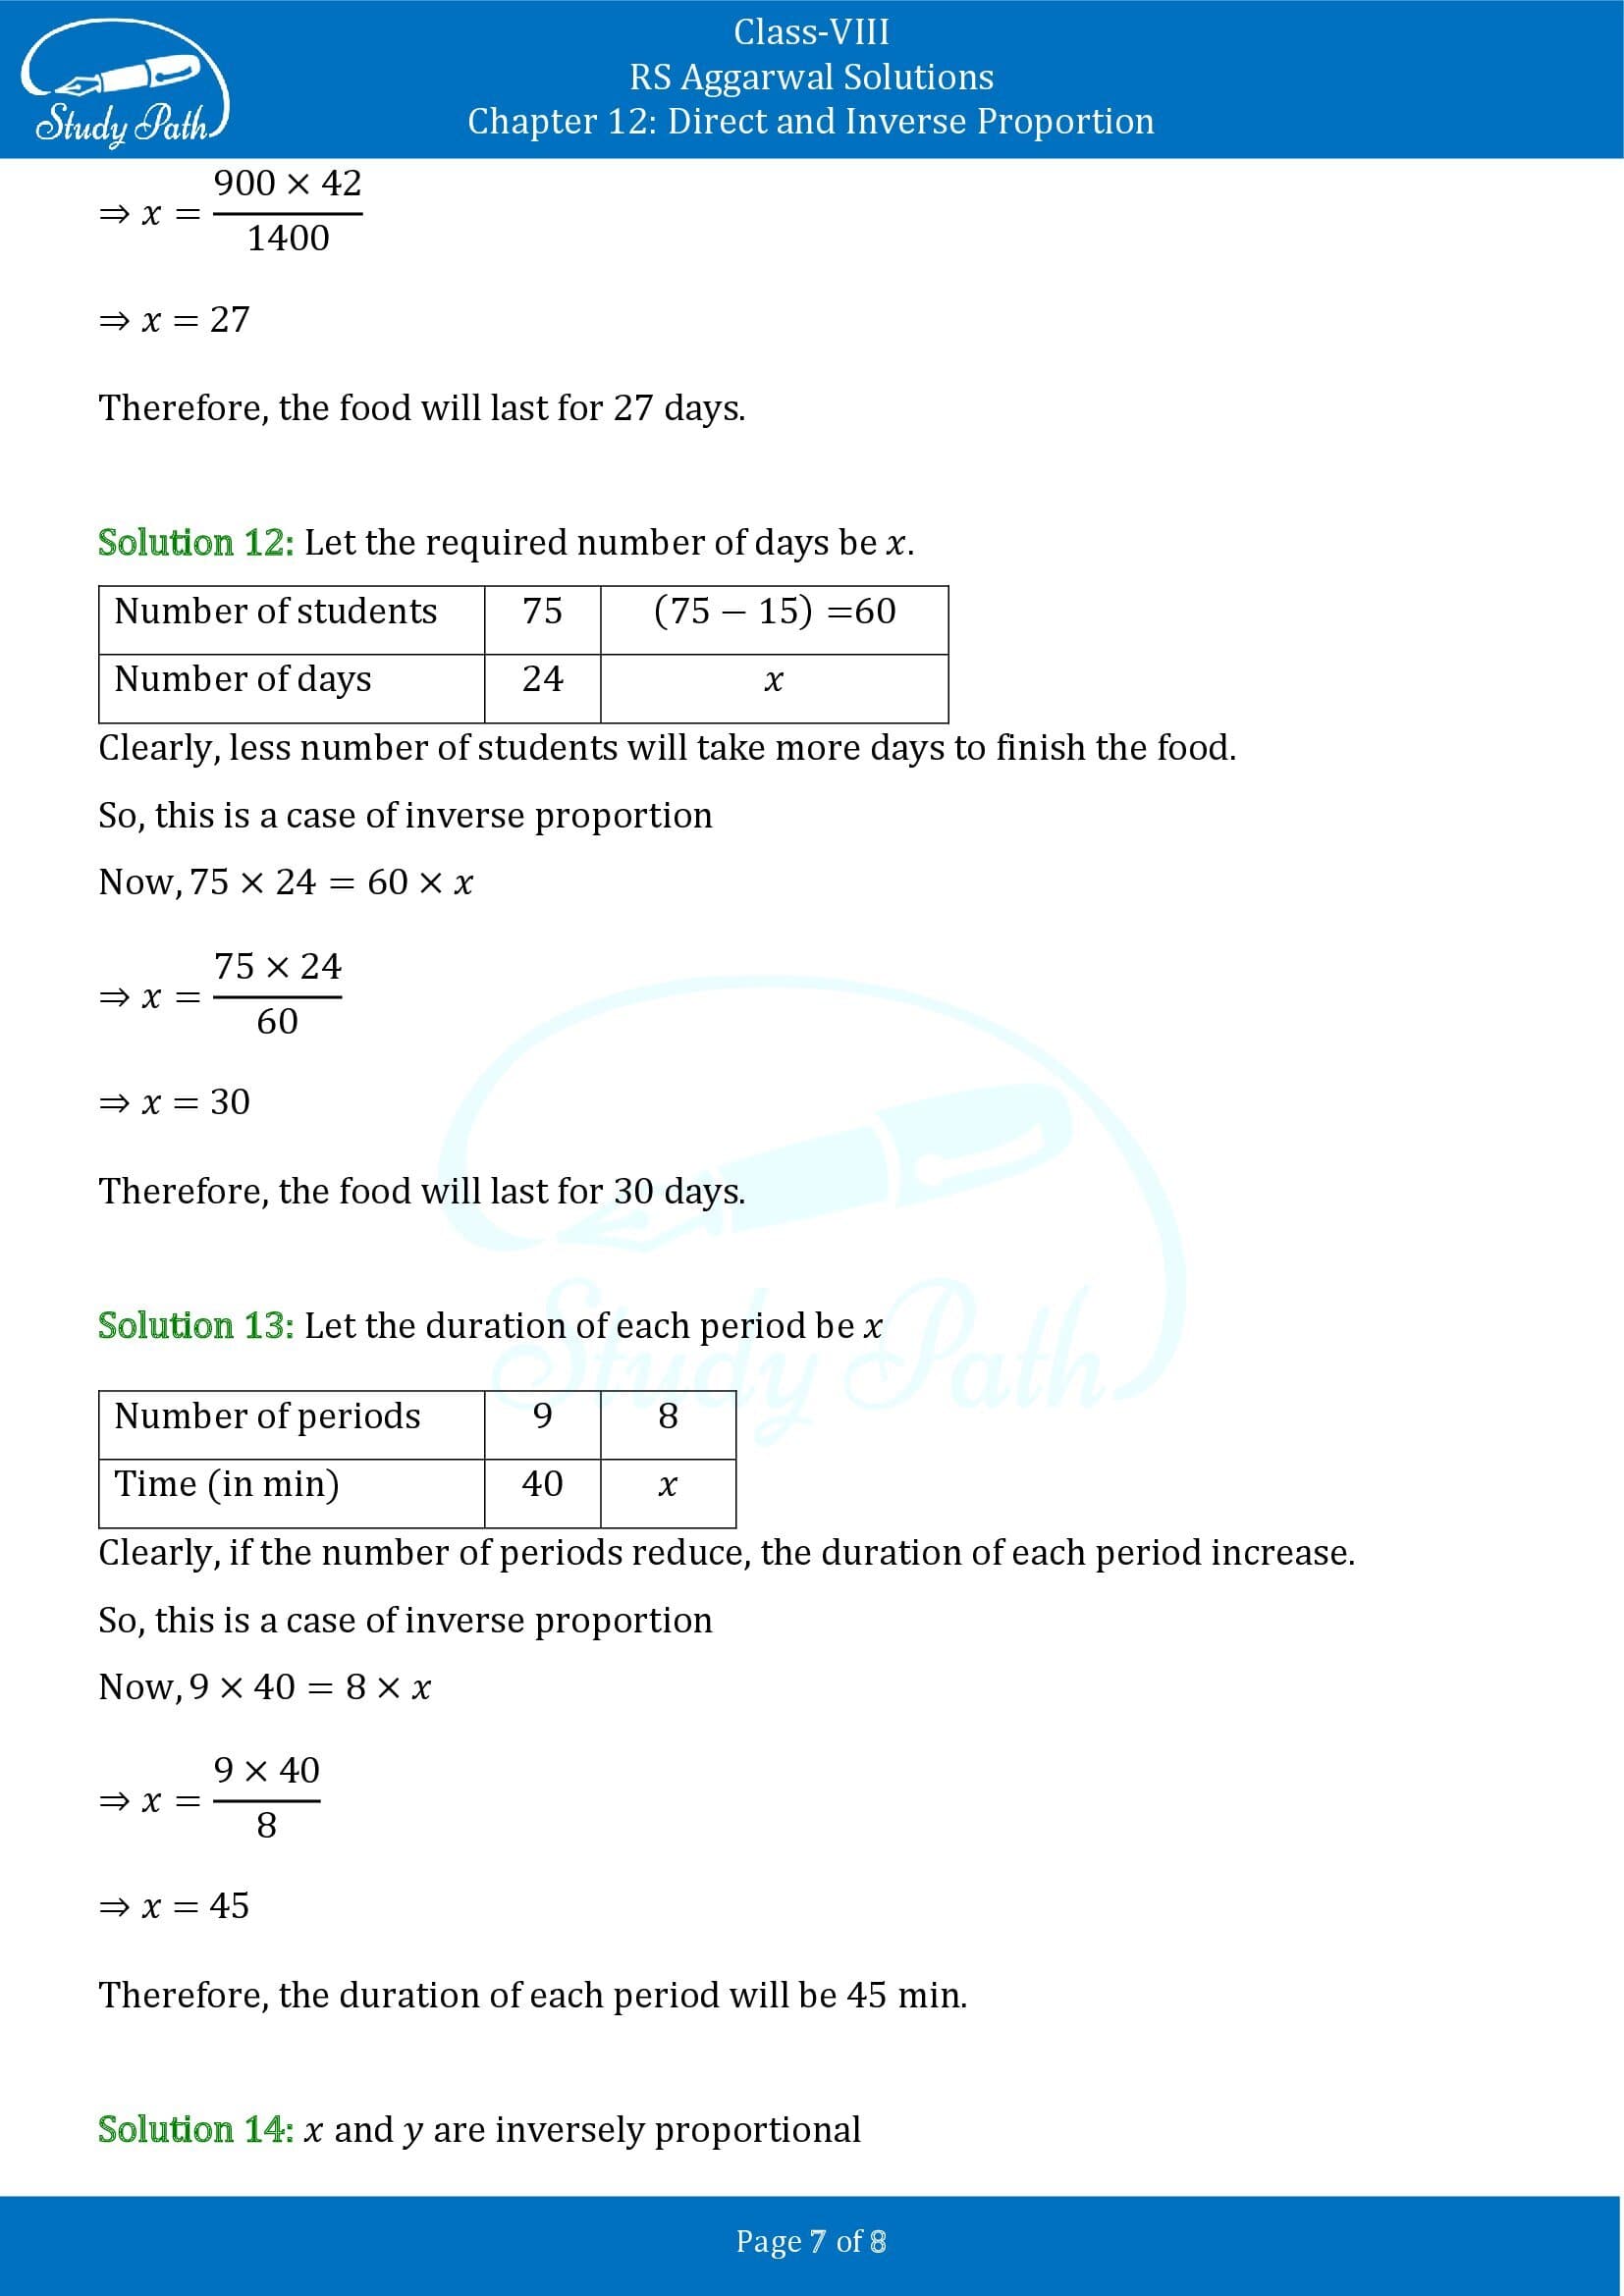 RS Aggarwal Solutions Class 8 Chapter 12 Direct and Inverse Proportion Exercise 12B 00007